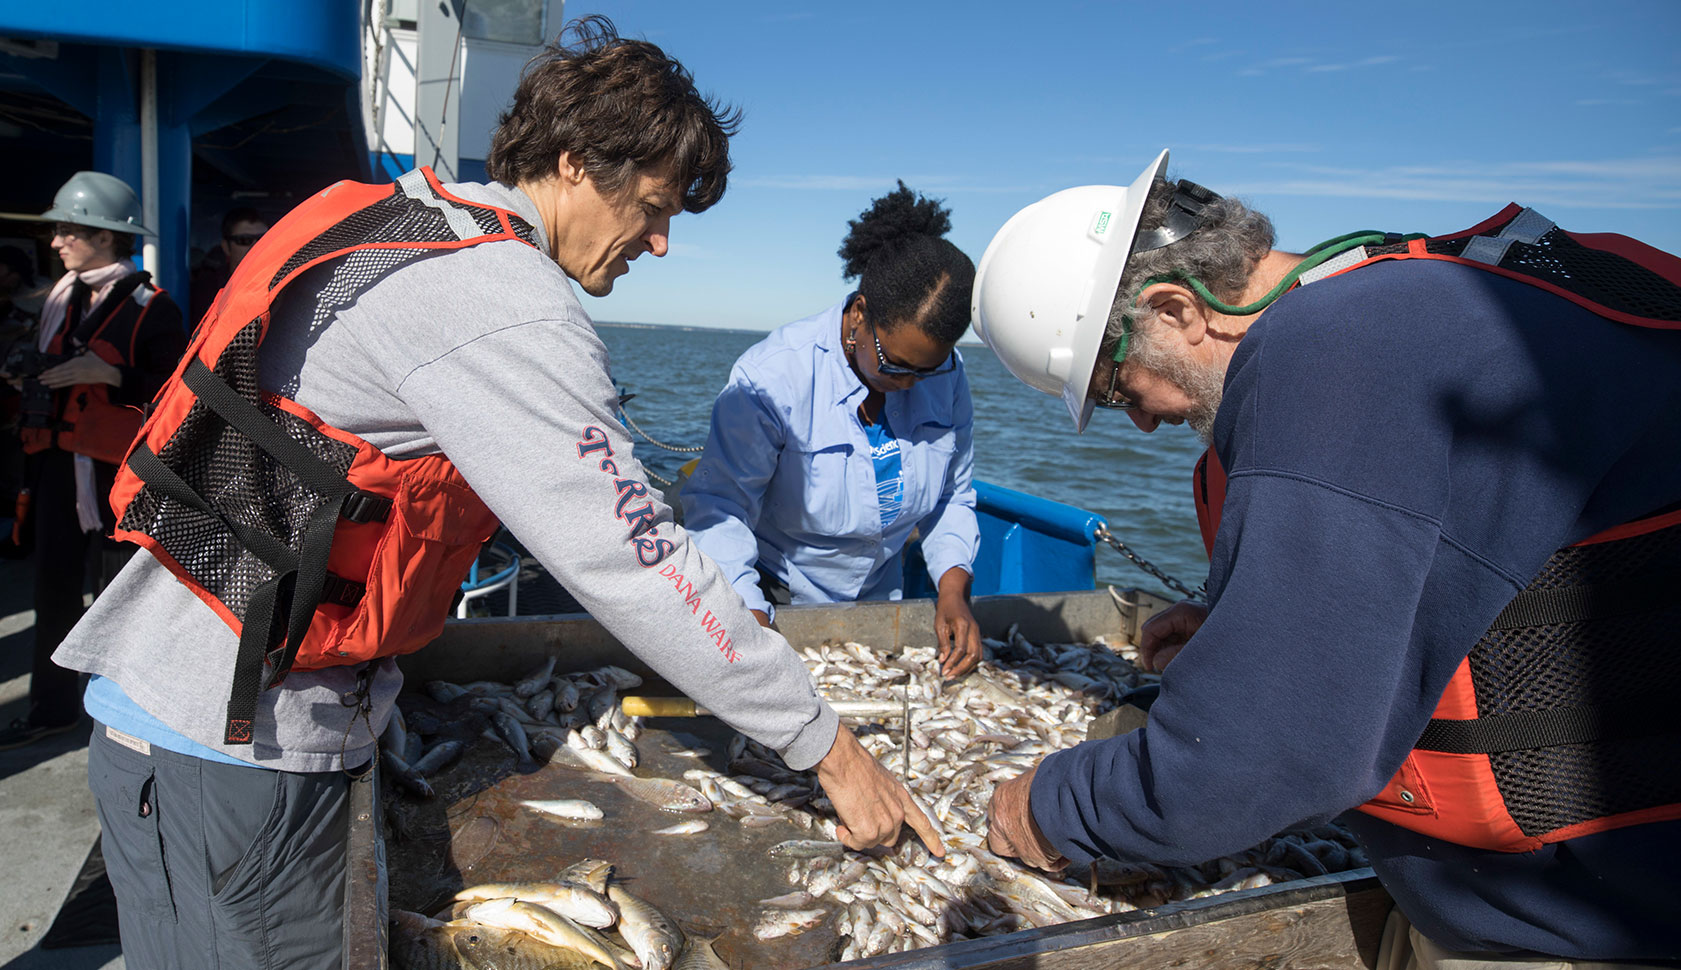 Ecology professor Jeb Byers assists with separating and inventorying marine animals on the R/V Savannah research vessel during a cruise off the Georgia coast.